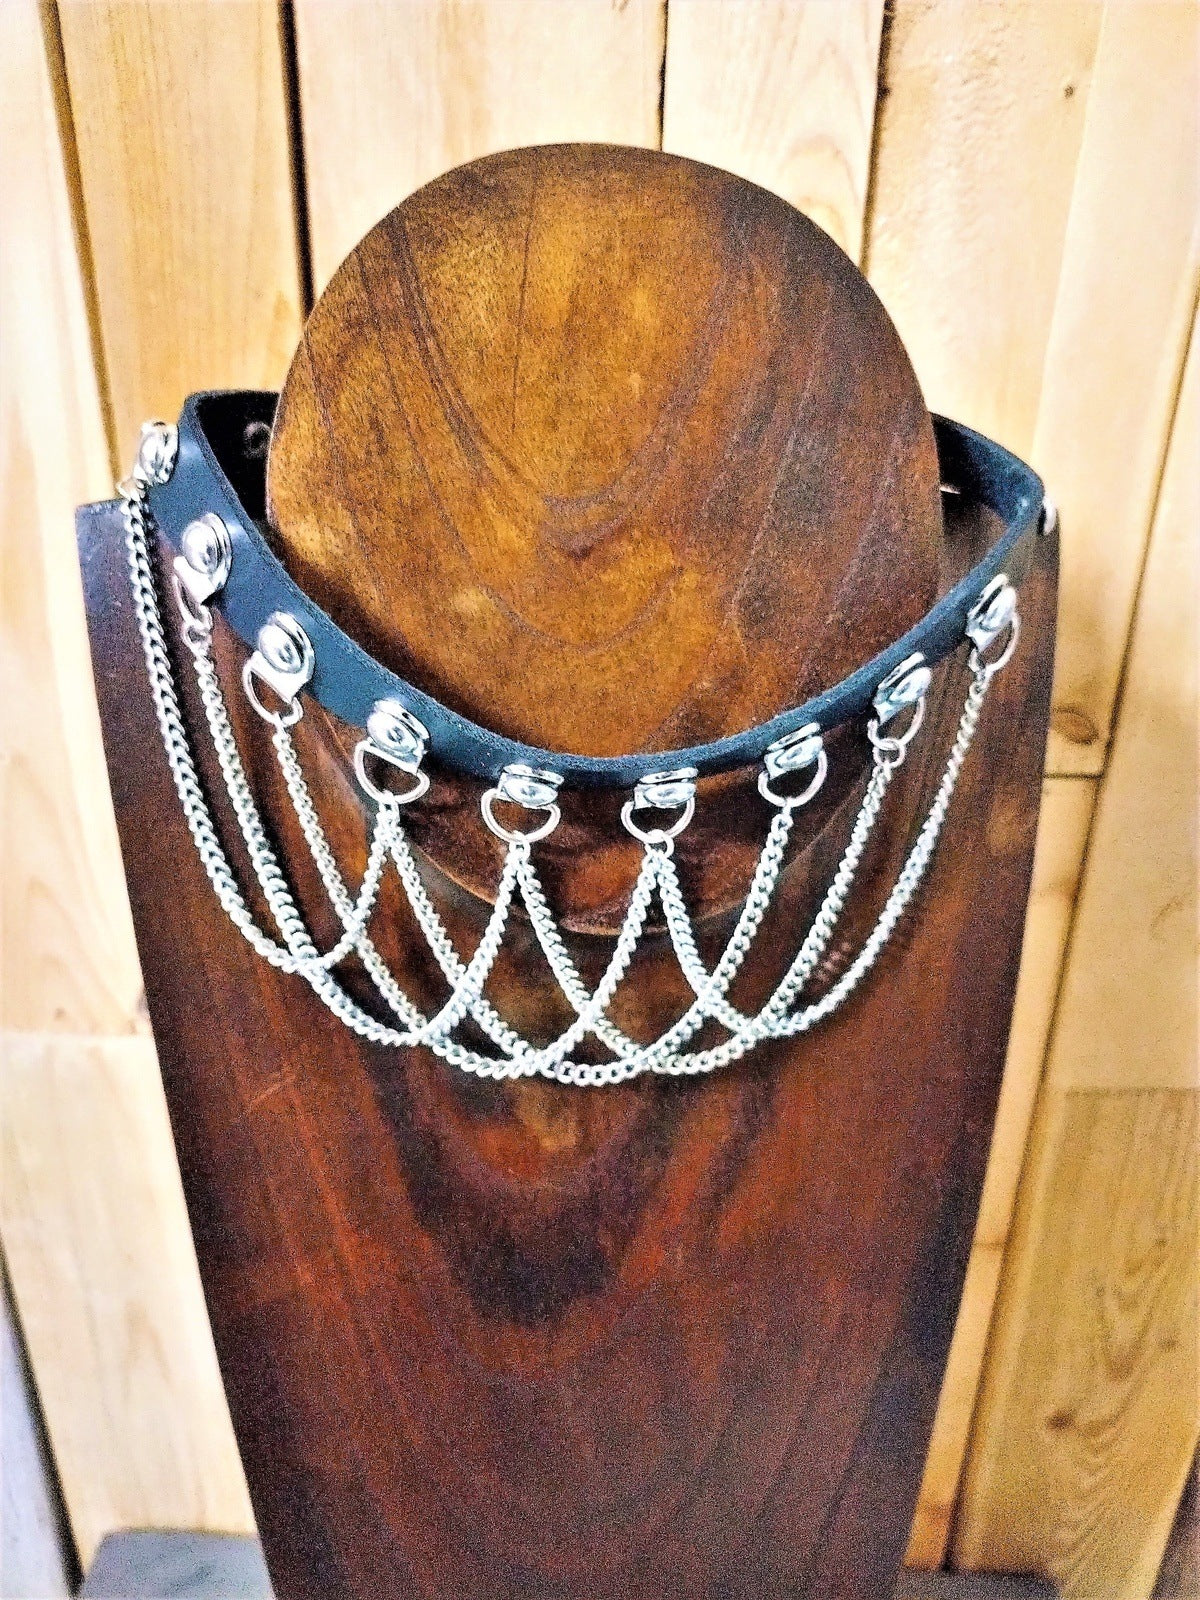 Black Vegan Leather Choker with Chains